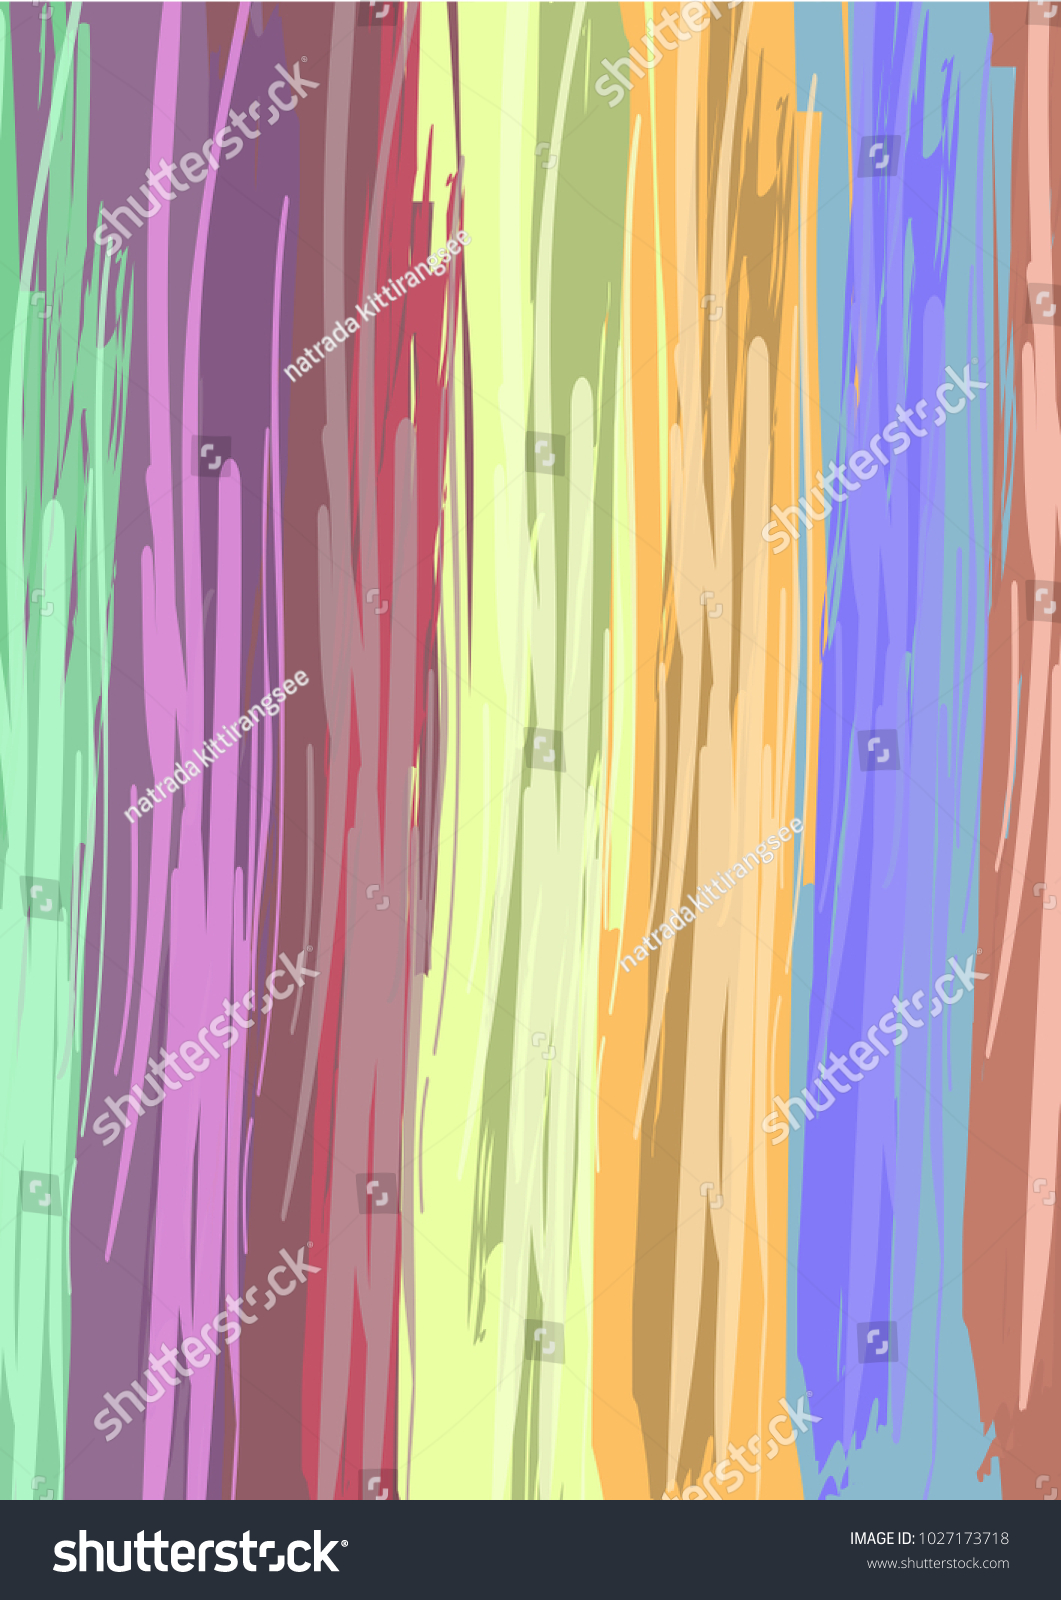 Seamless vector summer pattern. Abstract rainbow colorful lines vector art background with bright stripes in orange, blue, yellow, brown, pink, green, red. Watercolor lines overlapping modern. #1027173718